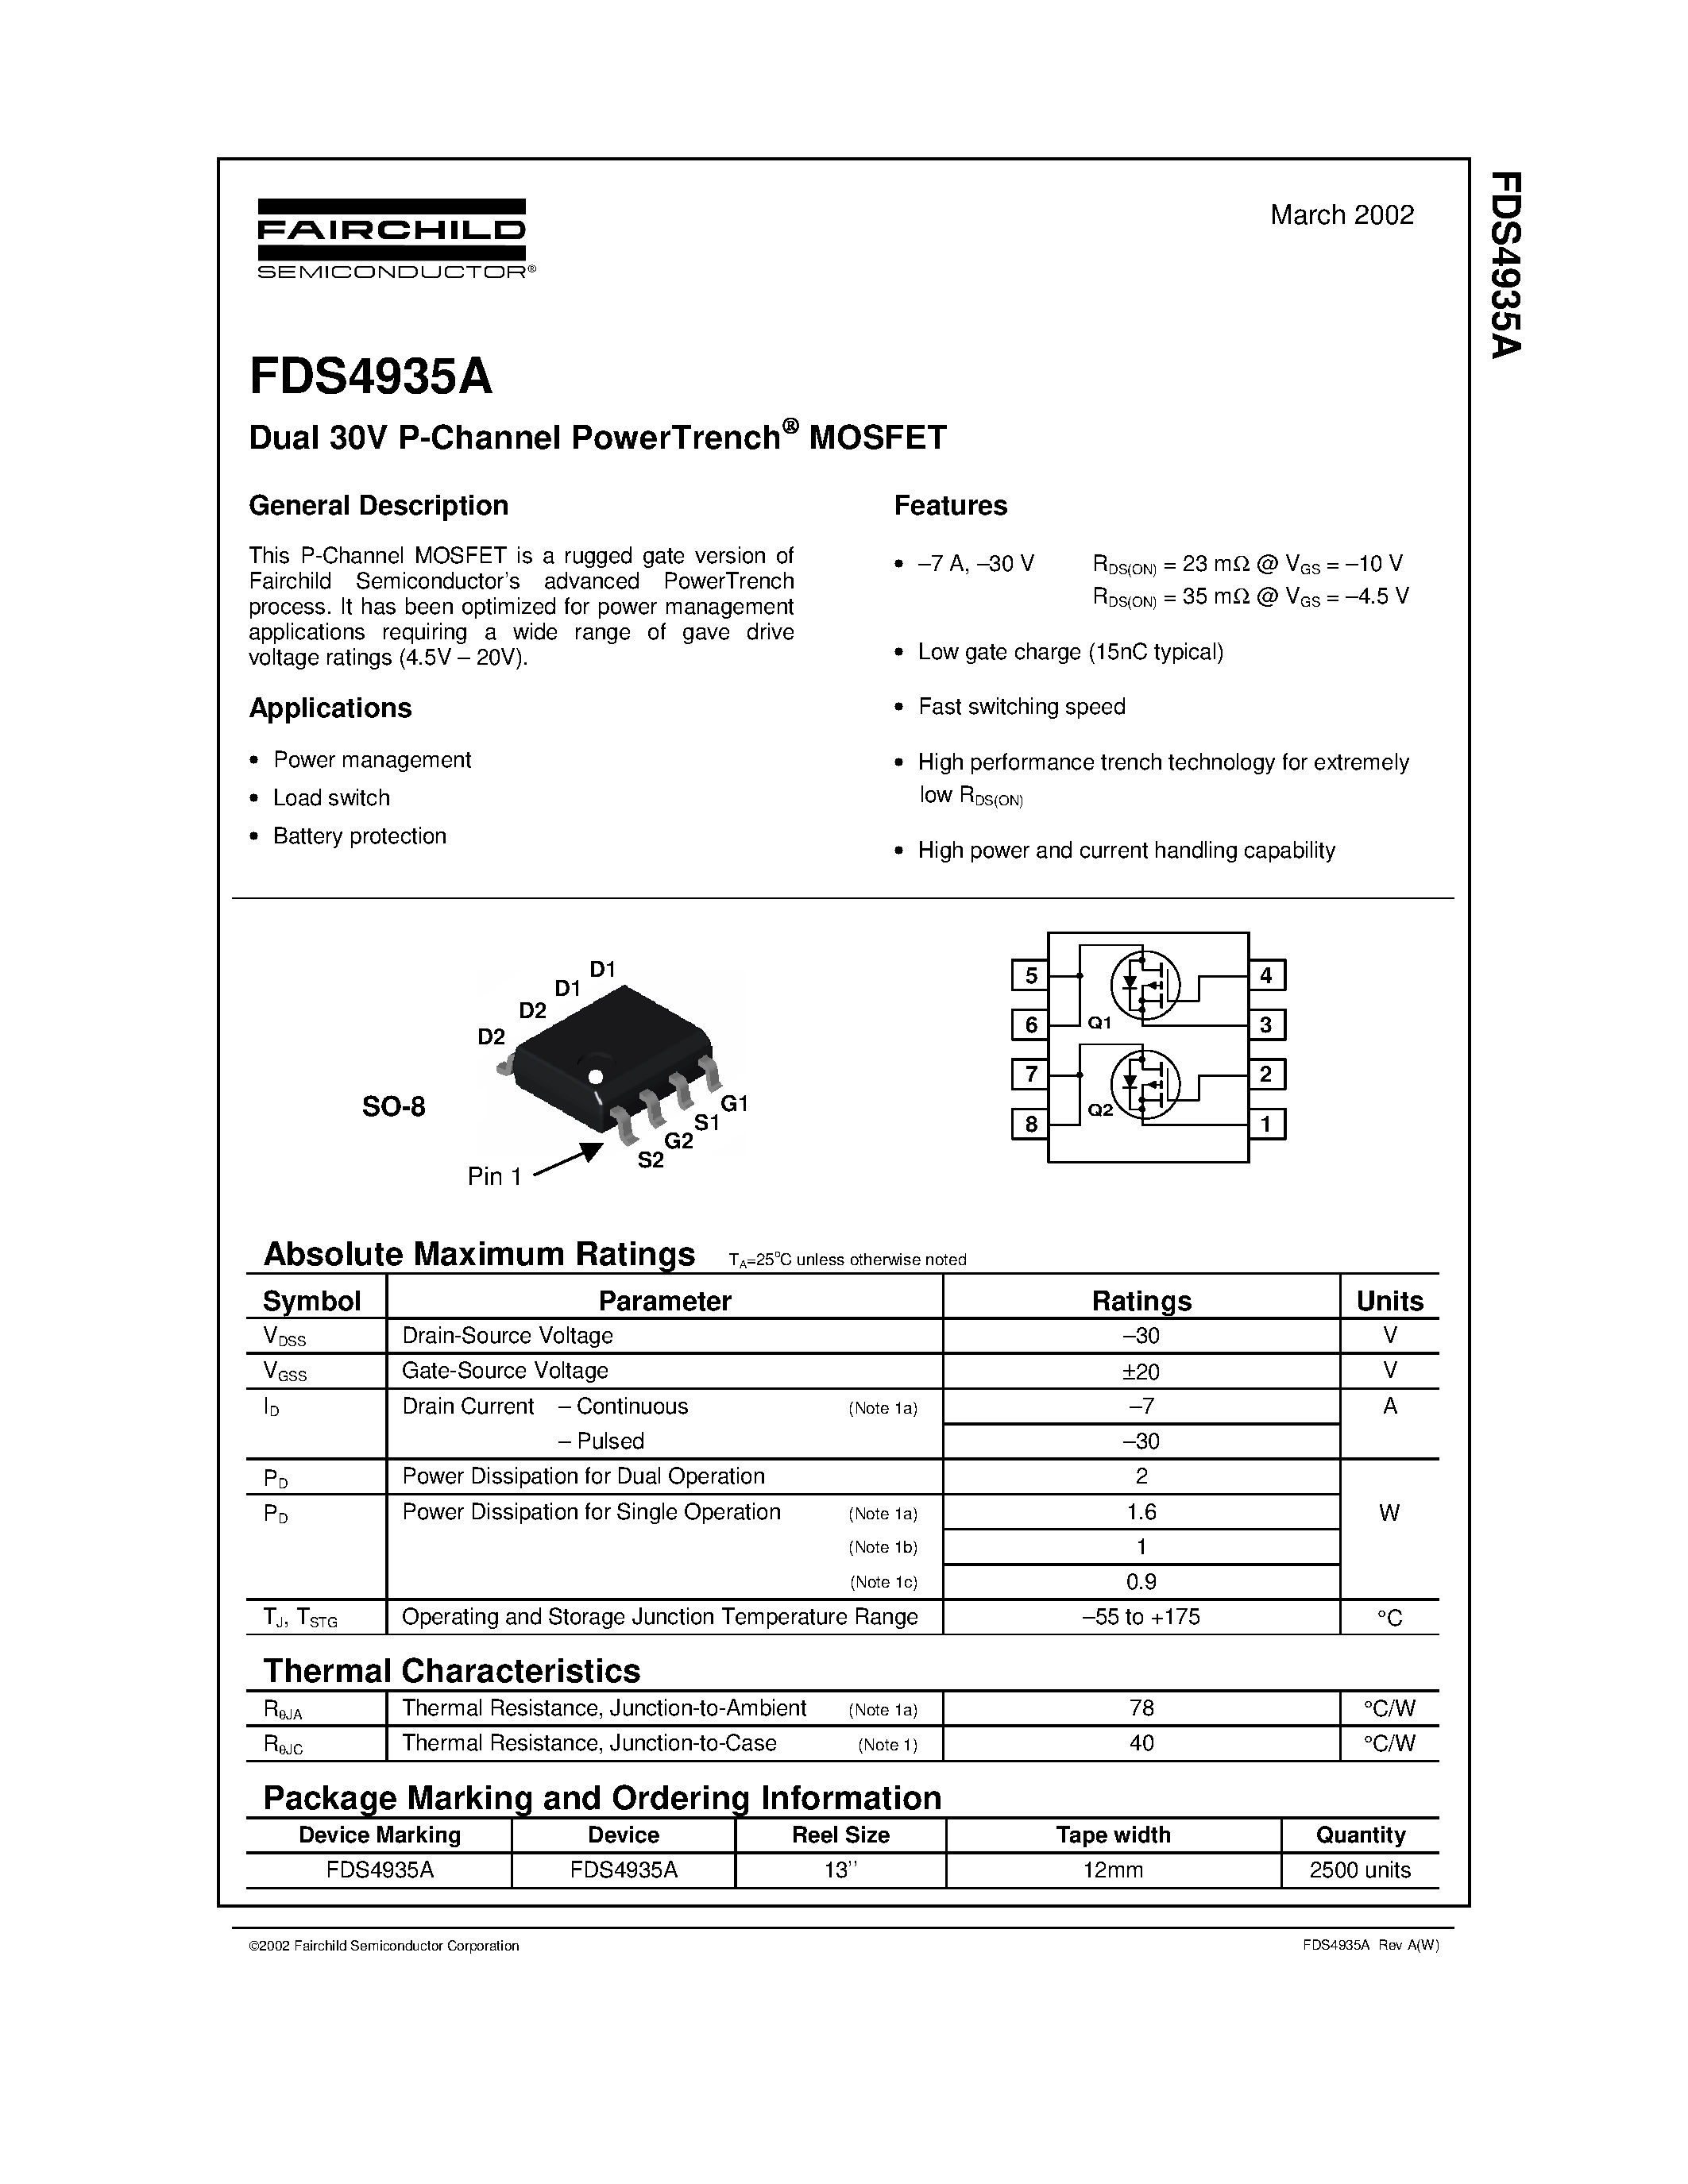 Datasheet FDS4935A - Dual 30V P-Channel PowerTrench MOSFET page 1